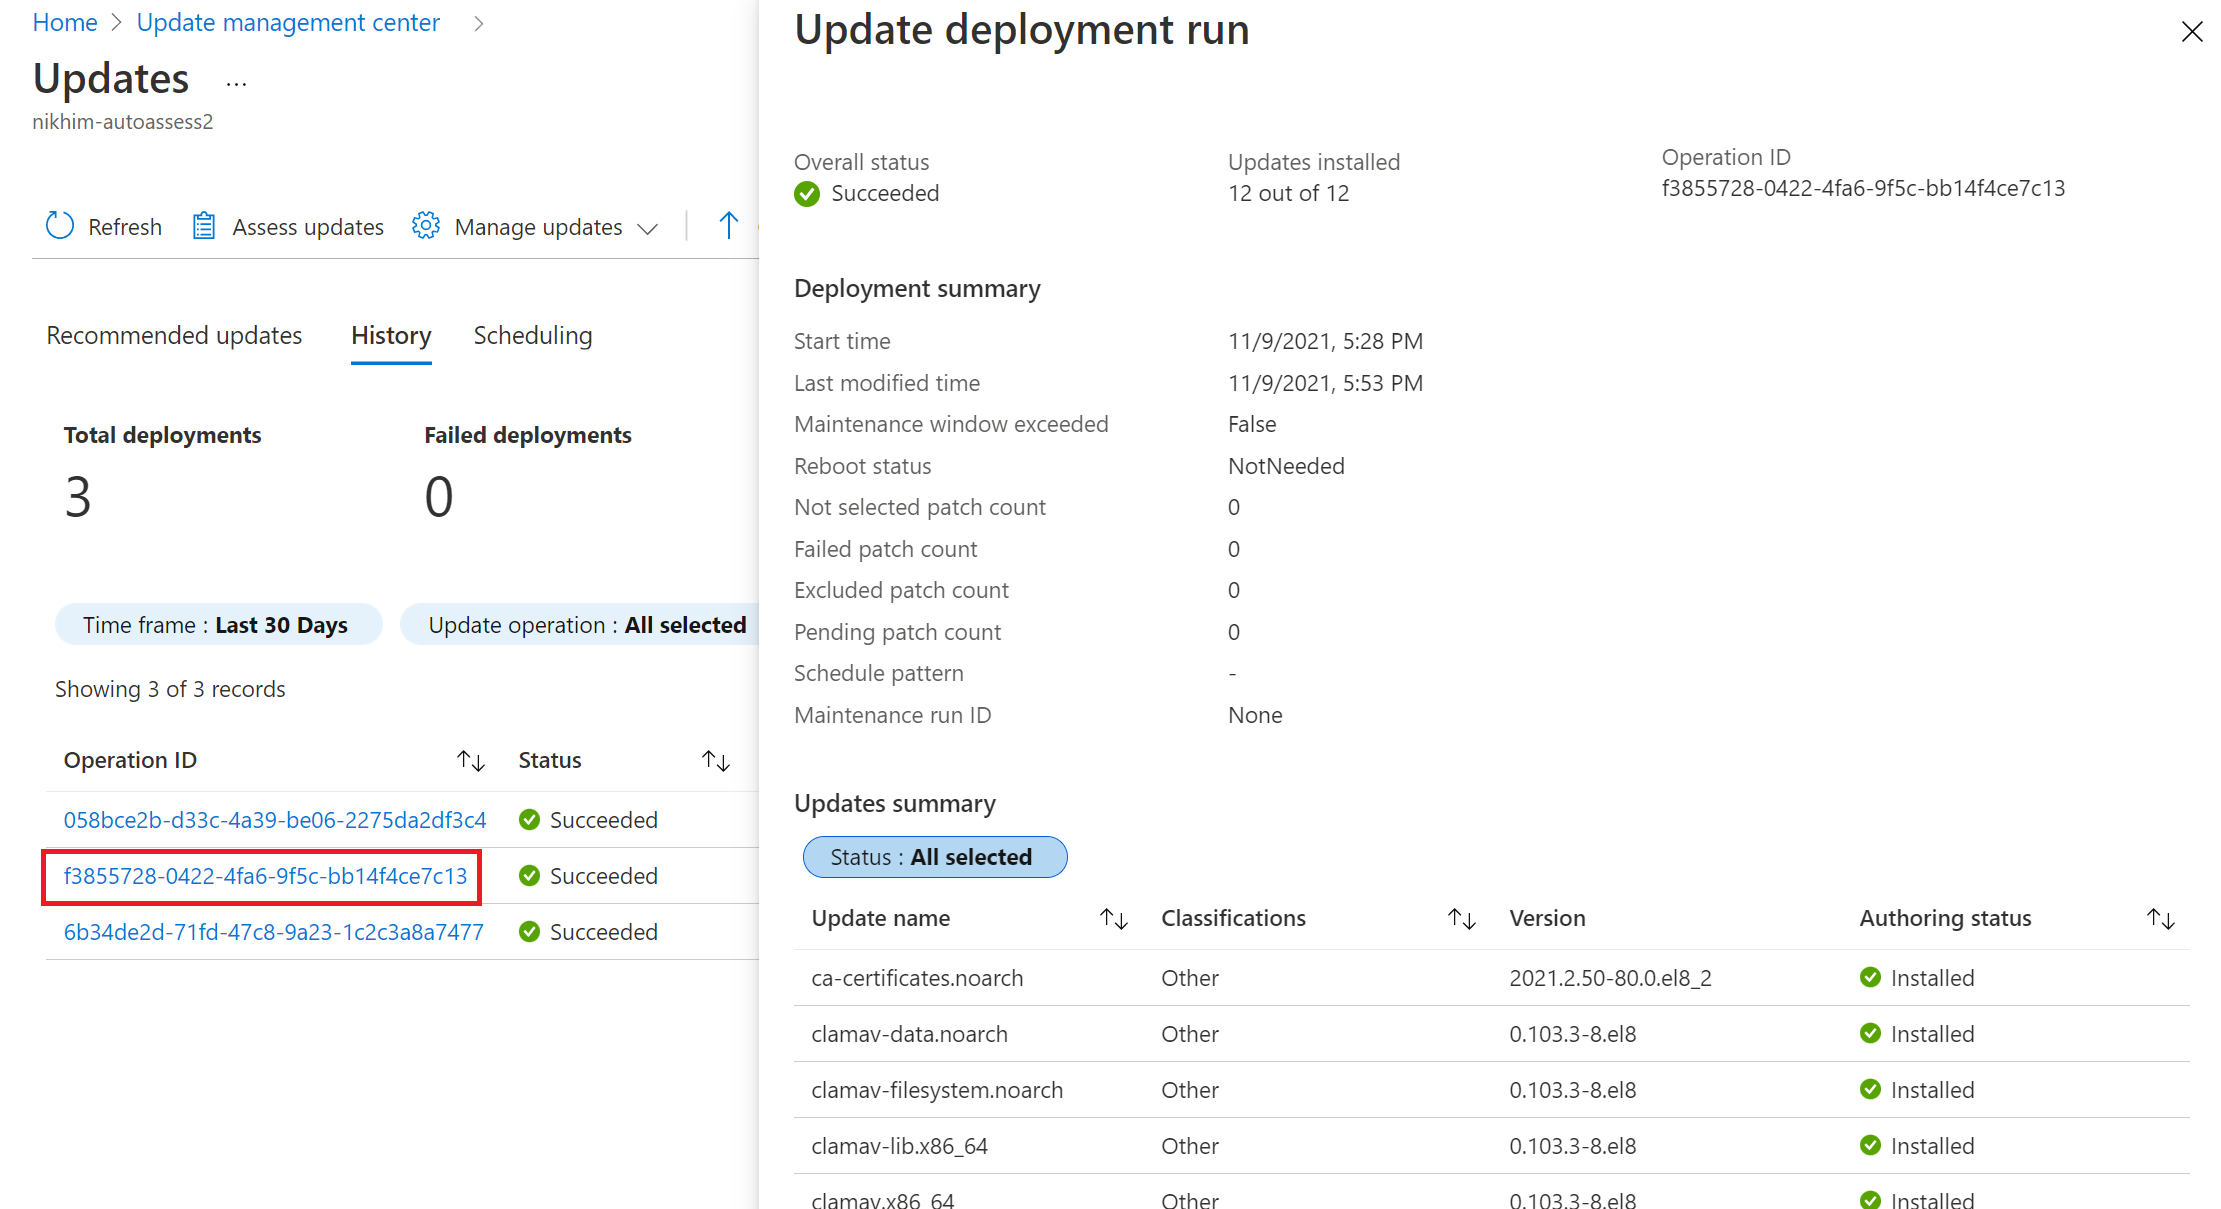 Screenshot that shows the Update deployment run page.